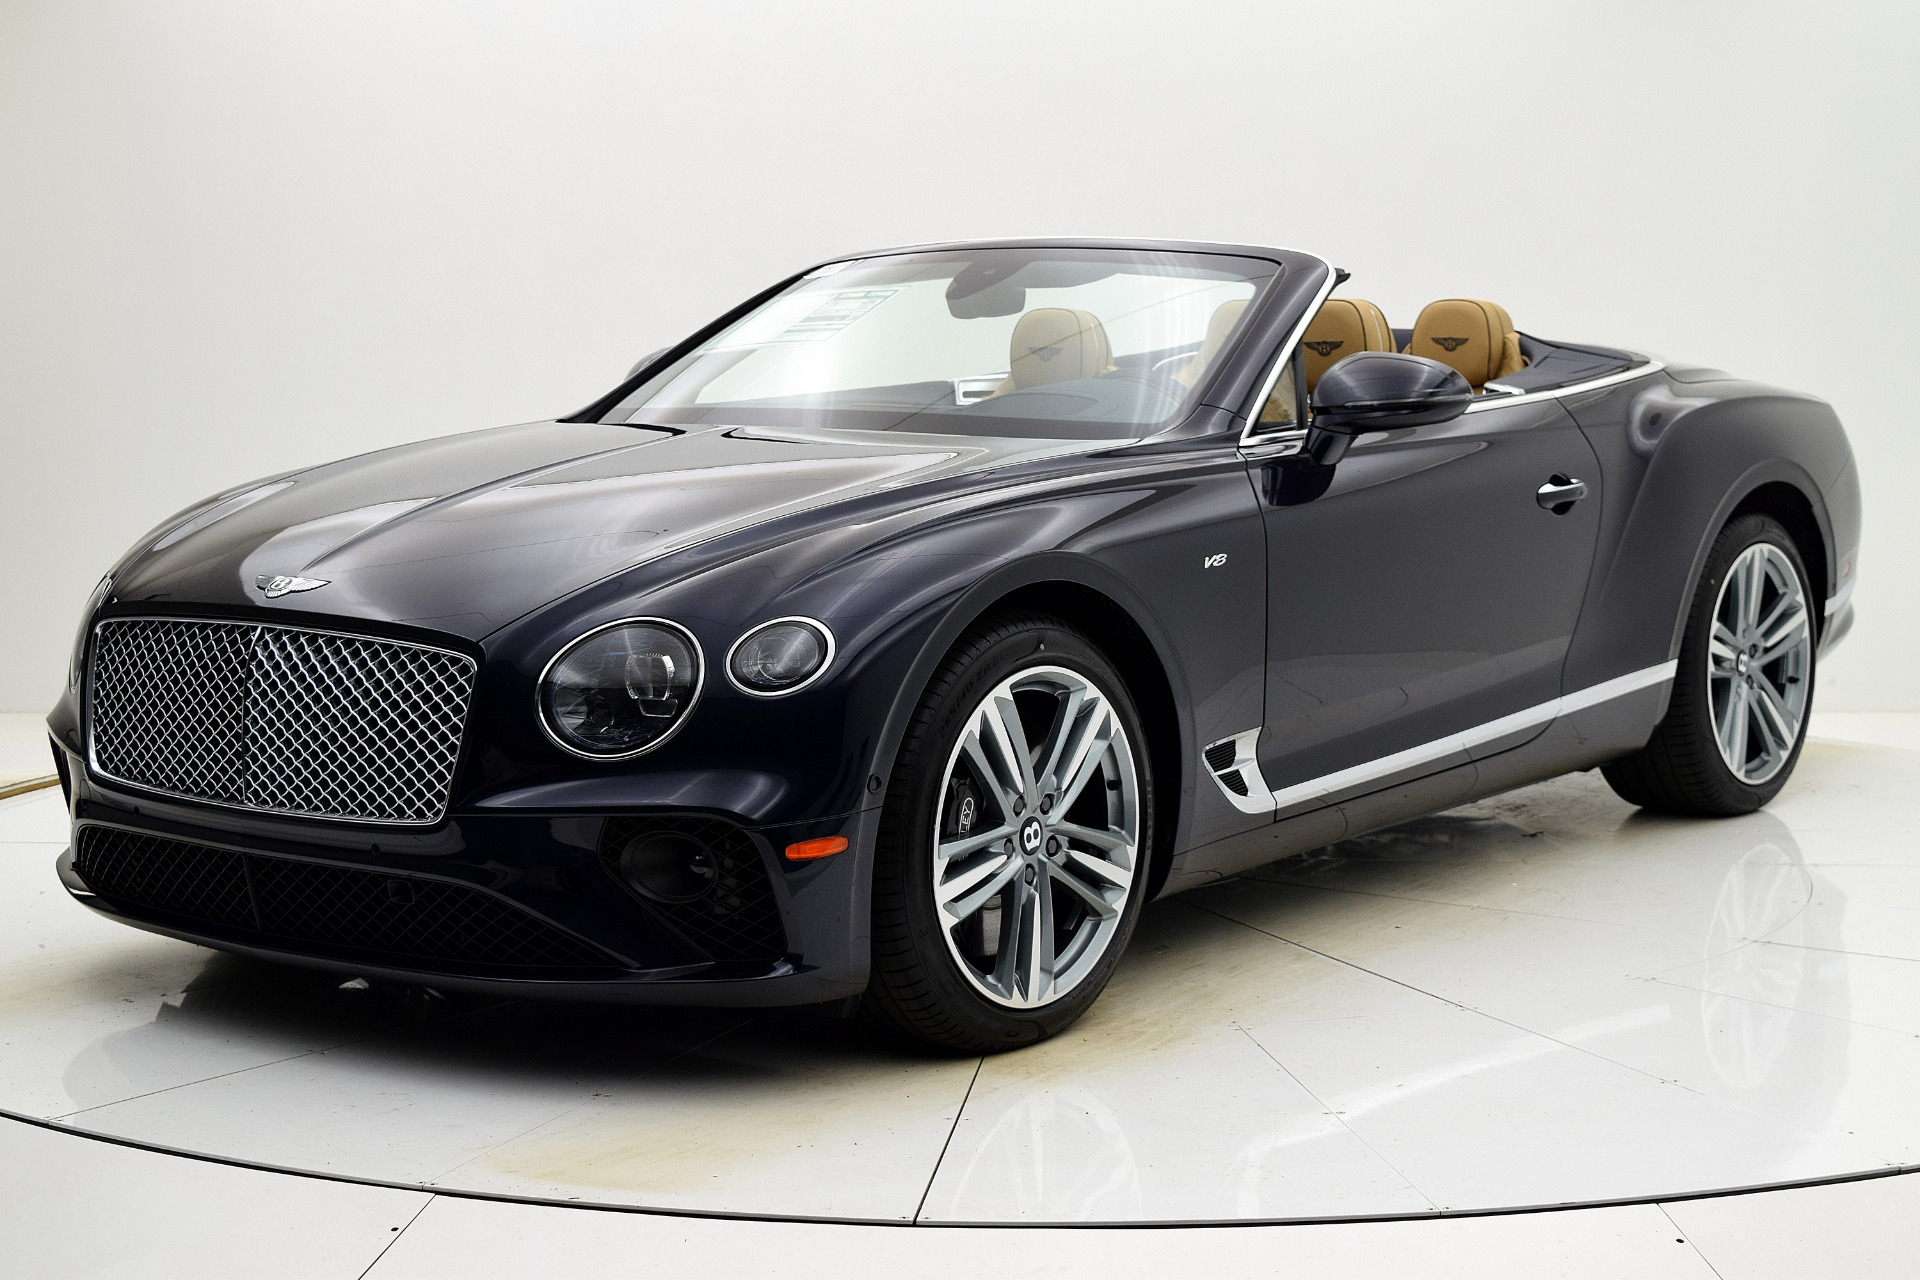 How To Rent A Bentley Gt V8 Convertible In Dubai